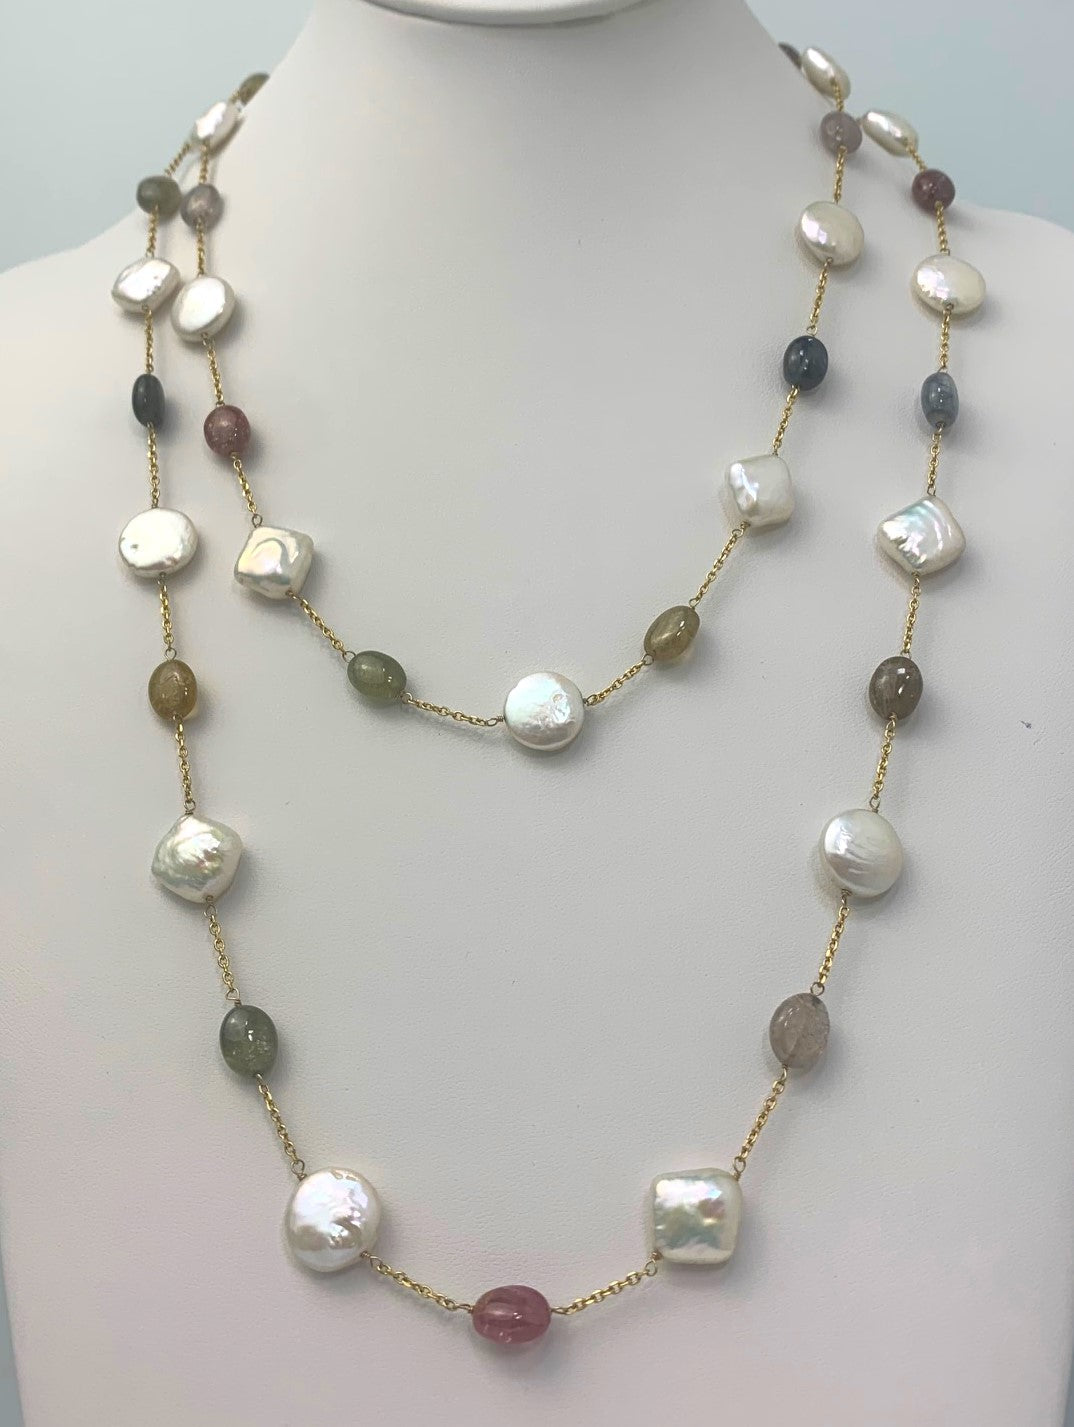 46" Sapphire and Coin Pearl Station Necklace in 14KY - NCK-104-TNCPRLGM14Y-WHSAP-46